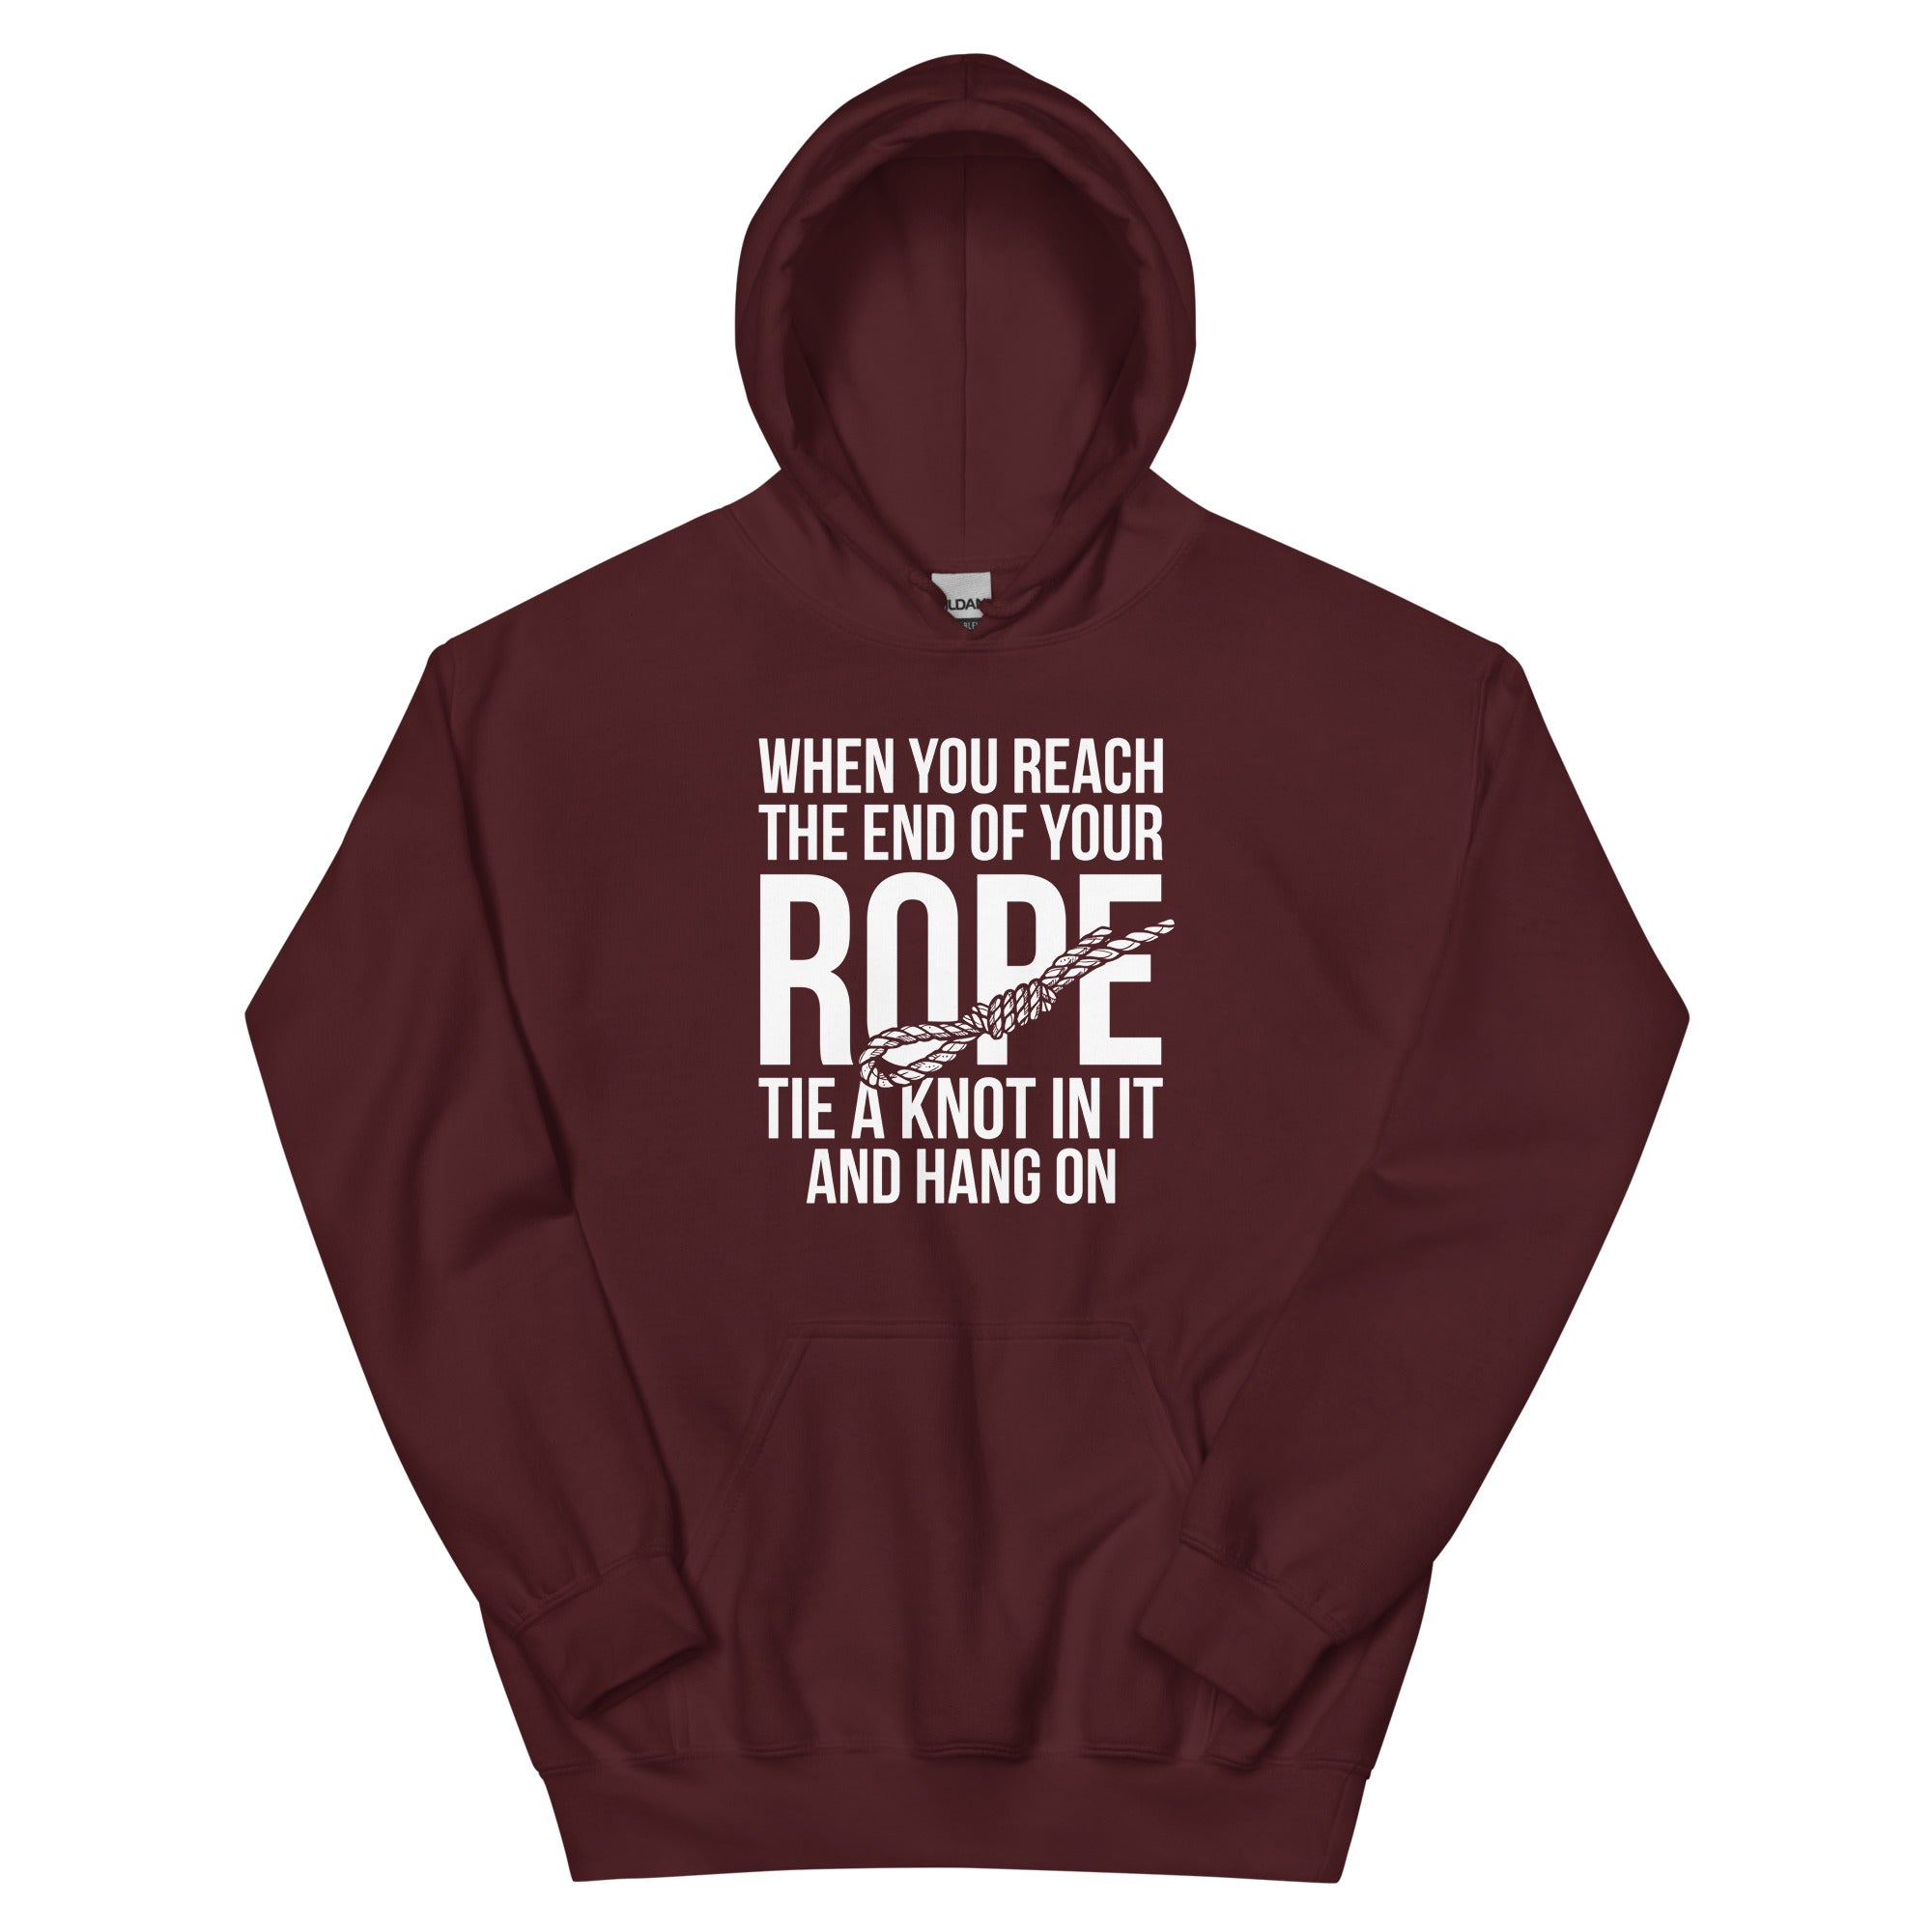 When You Reach The End Of Your Rope - Unisex Hoodie